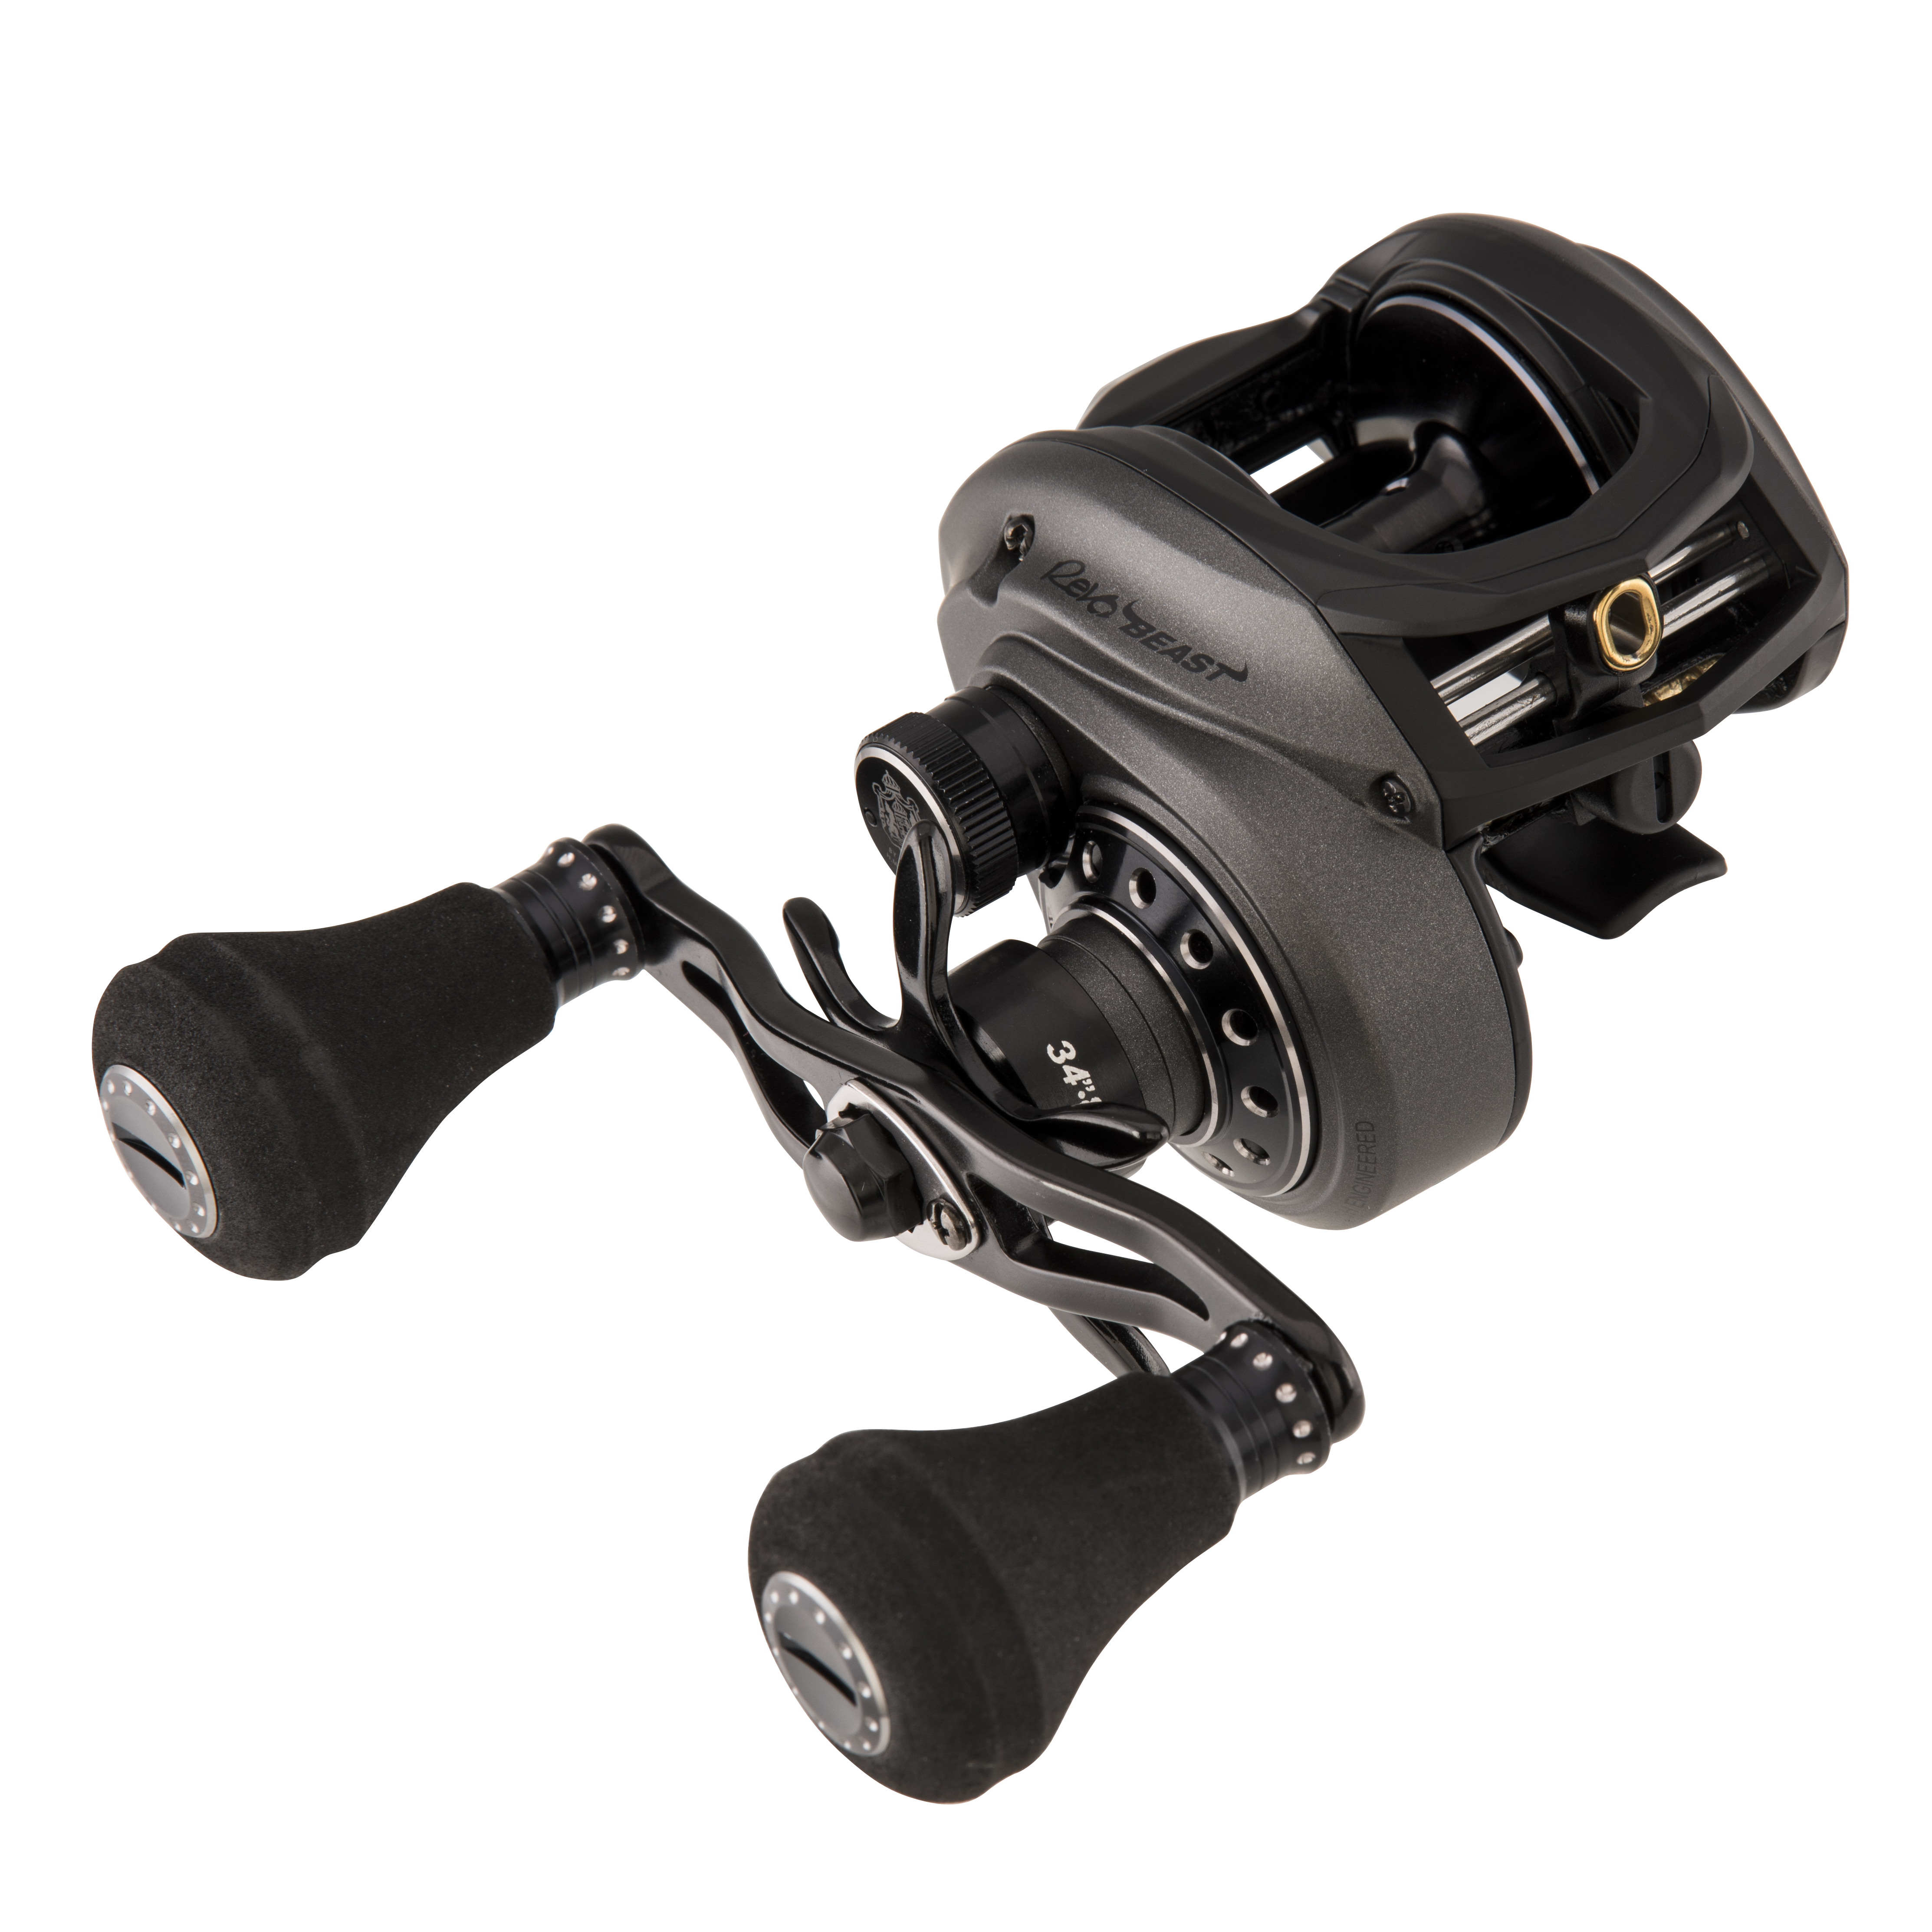 Revo Beast<br>
Abu Garcia<br>
$279<br>
For all heavy-duty applications, the Abu Garcia Revo Beast delivers high performance features specifically engineered for casting larger baits and fighting hard pulling fish. The Power Stack Carbon Matrix Drag System includes an additional carbon washer set to give you 30 pounds of drag pressure.											